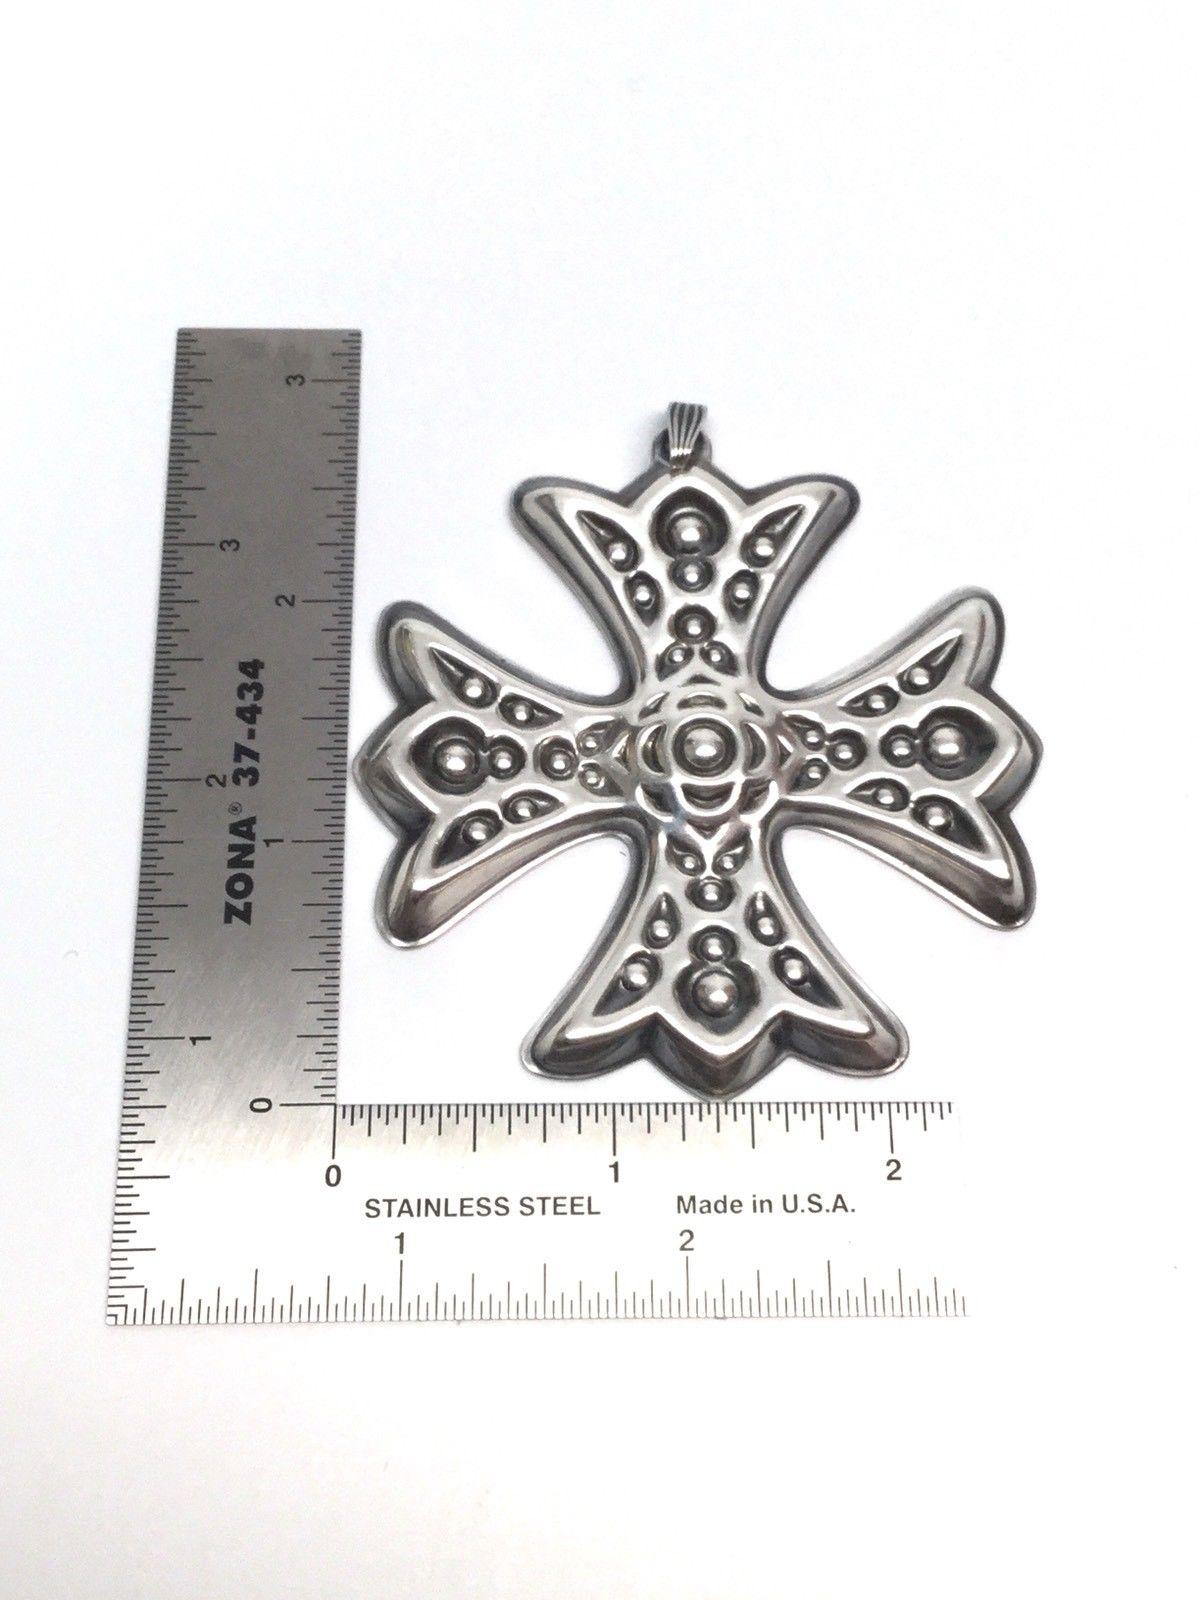 1975 Reed & Barton sterling silver Christmas cross ornament. This is a lovely 1975 sterling silver Christmas cross ornament by Reed & Barton. Measurement: Approximate 2 3/4 inches L x 2 11/16 inches wide. Weight: 20.2 g / 13.0 dwt. Condition: In